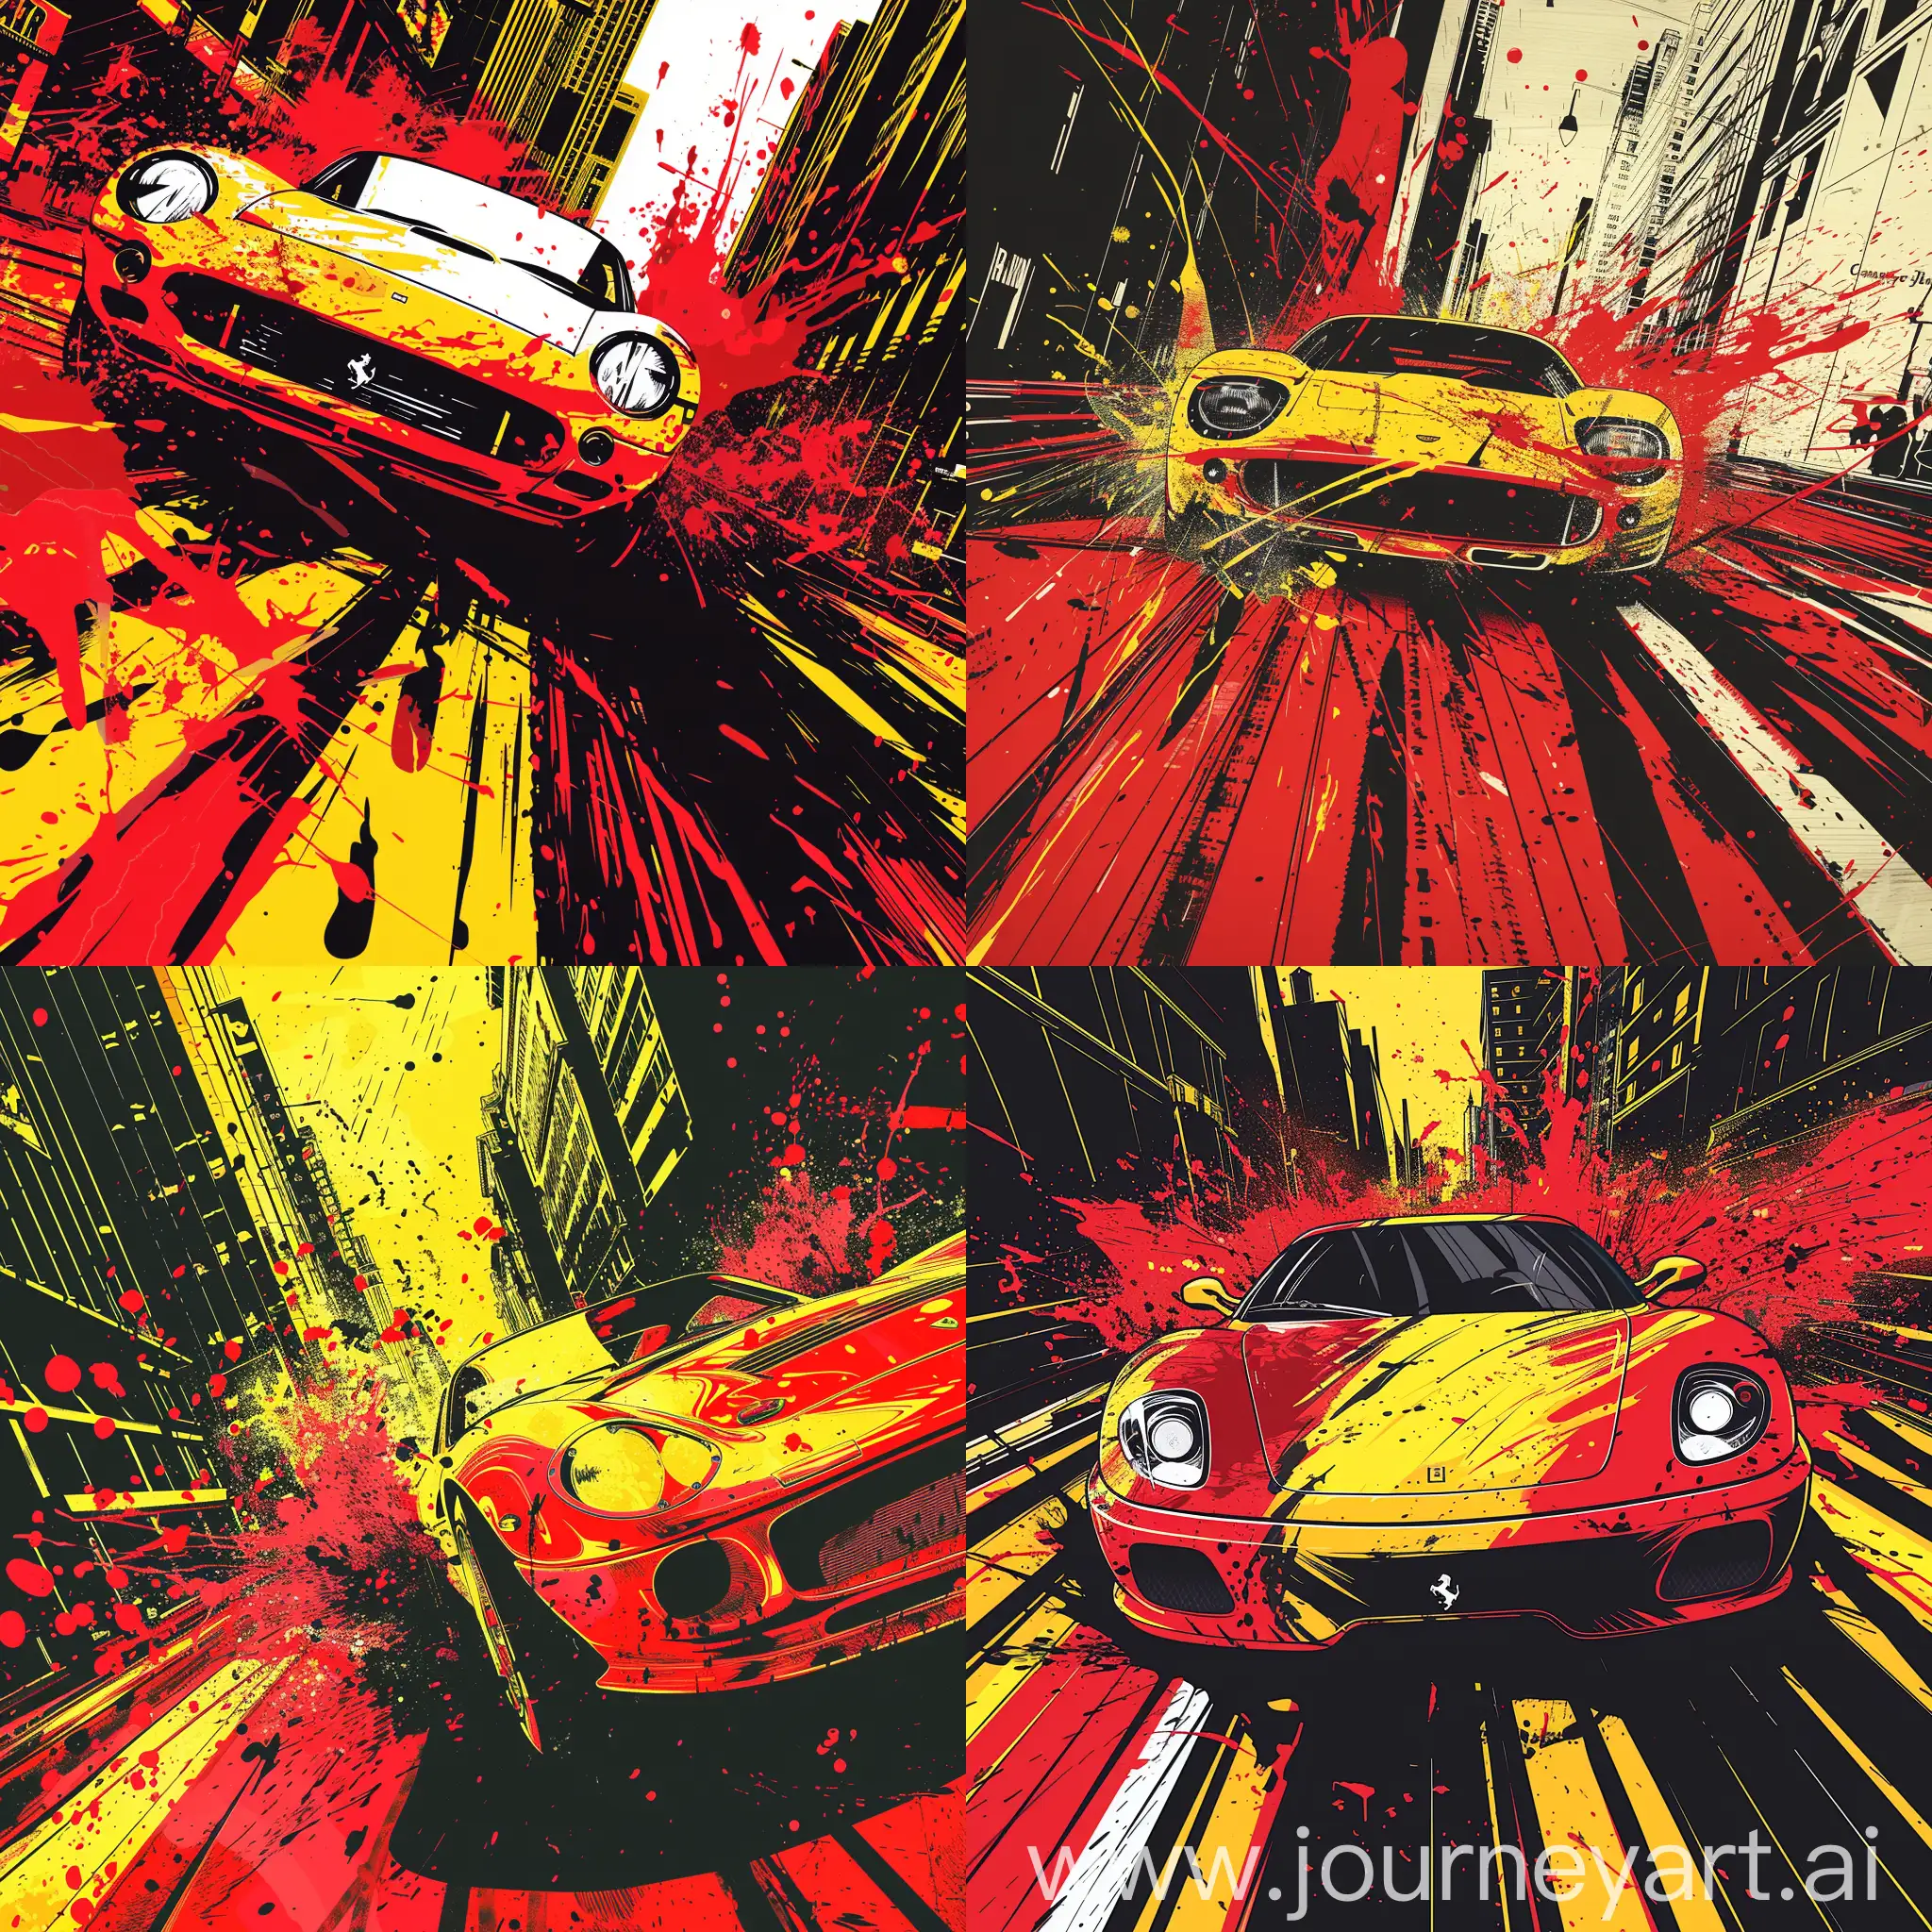 A Retro Pop art style of extreme close up of front view grand turismo classical racing moment in the middle of city, red and yellow,splash ink , drift cornering, classical marvel art,pop art digital,Adrenaline moment